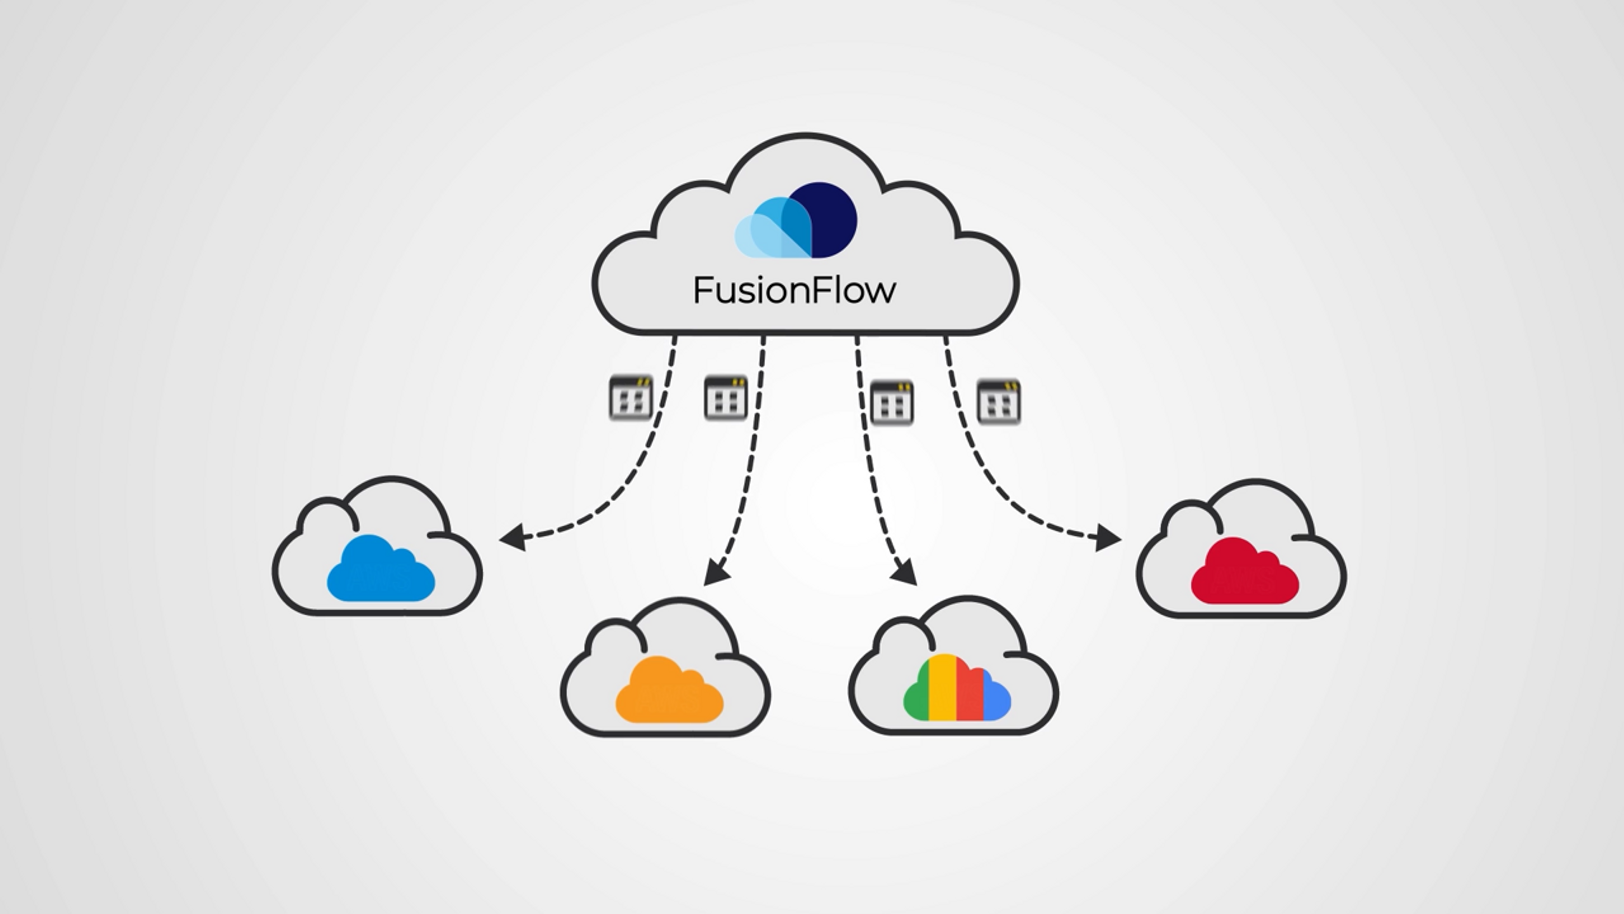 FusionFlow - Unified application runtime across heterogeneous environments